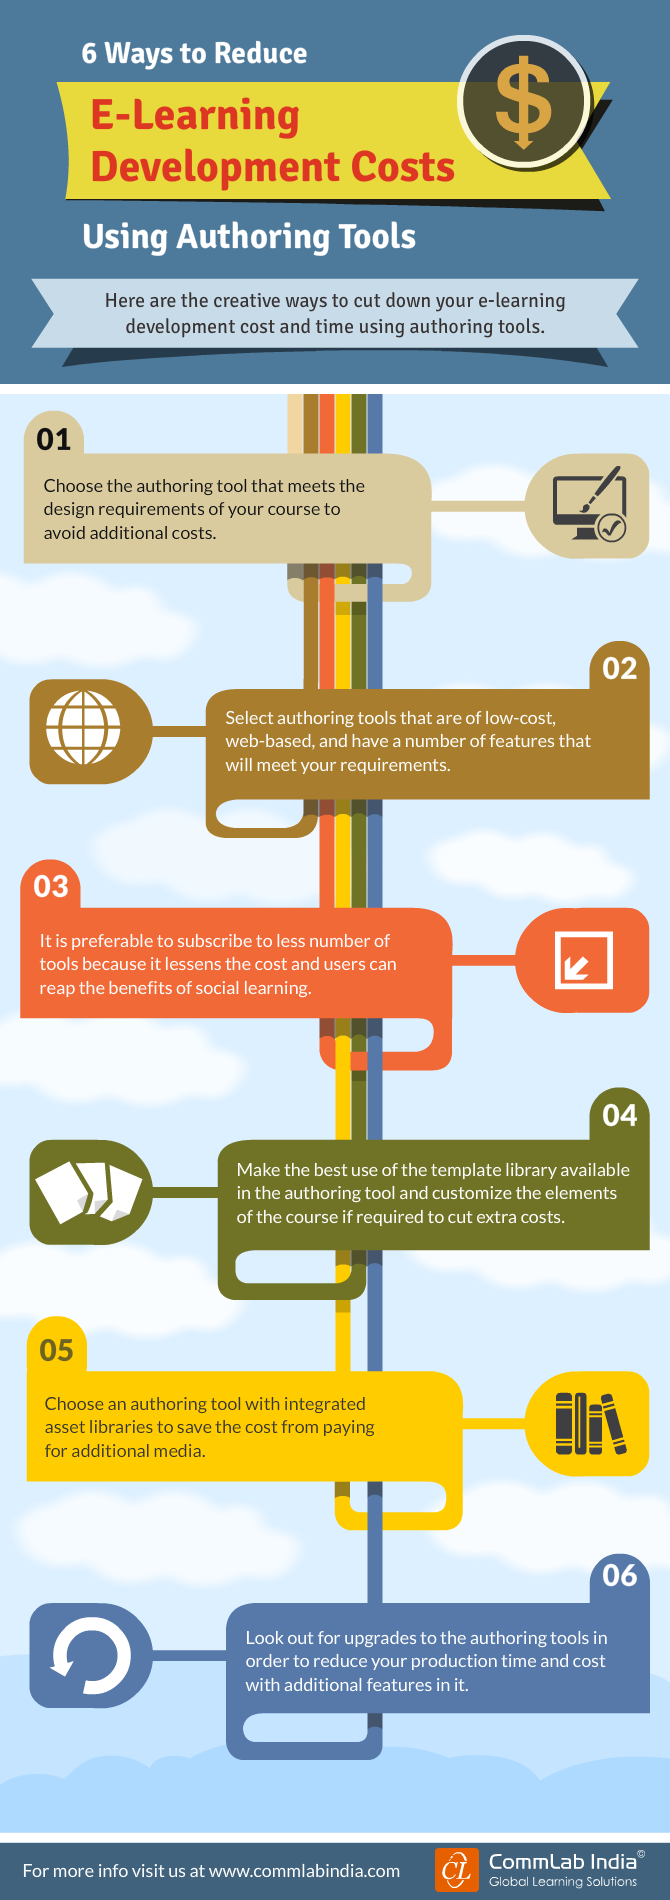 6 Ways to Reduce E-Learning Development Costs Using Authoring Tools [Infographic]